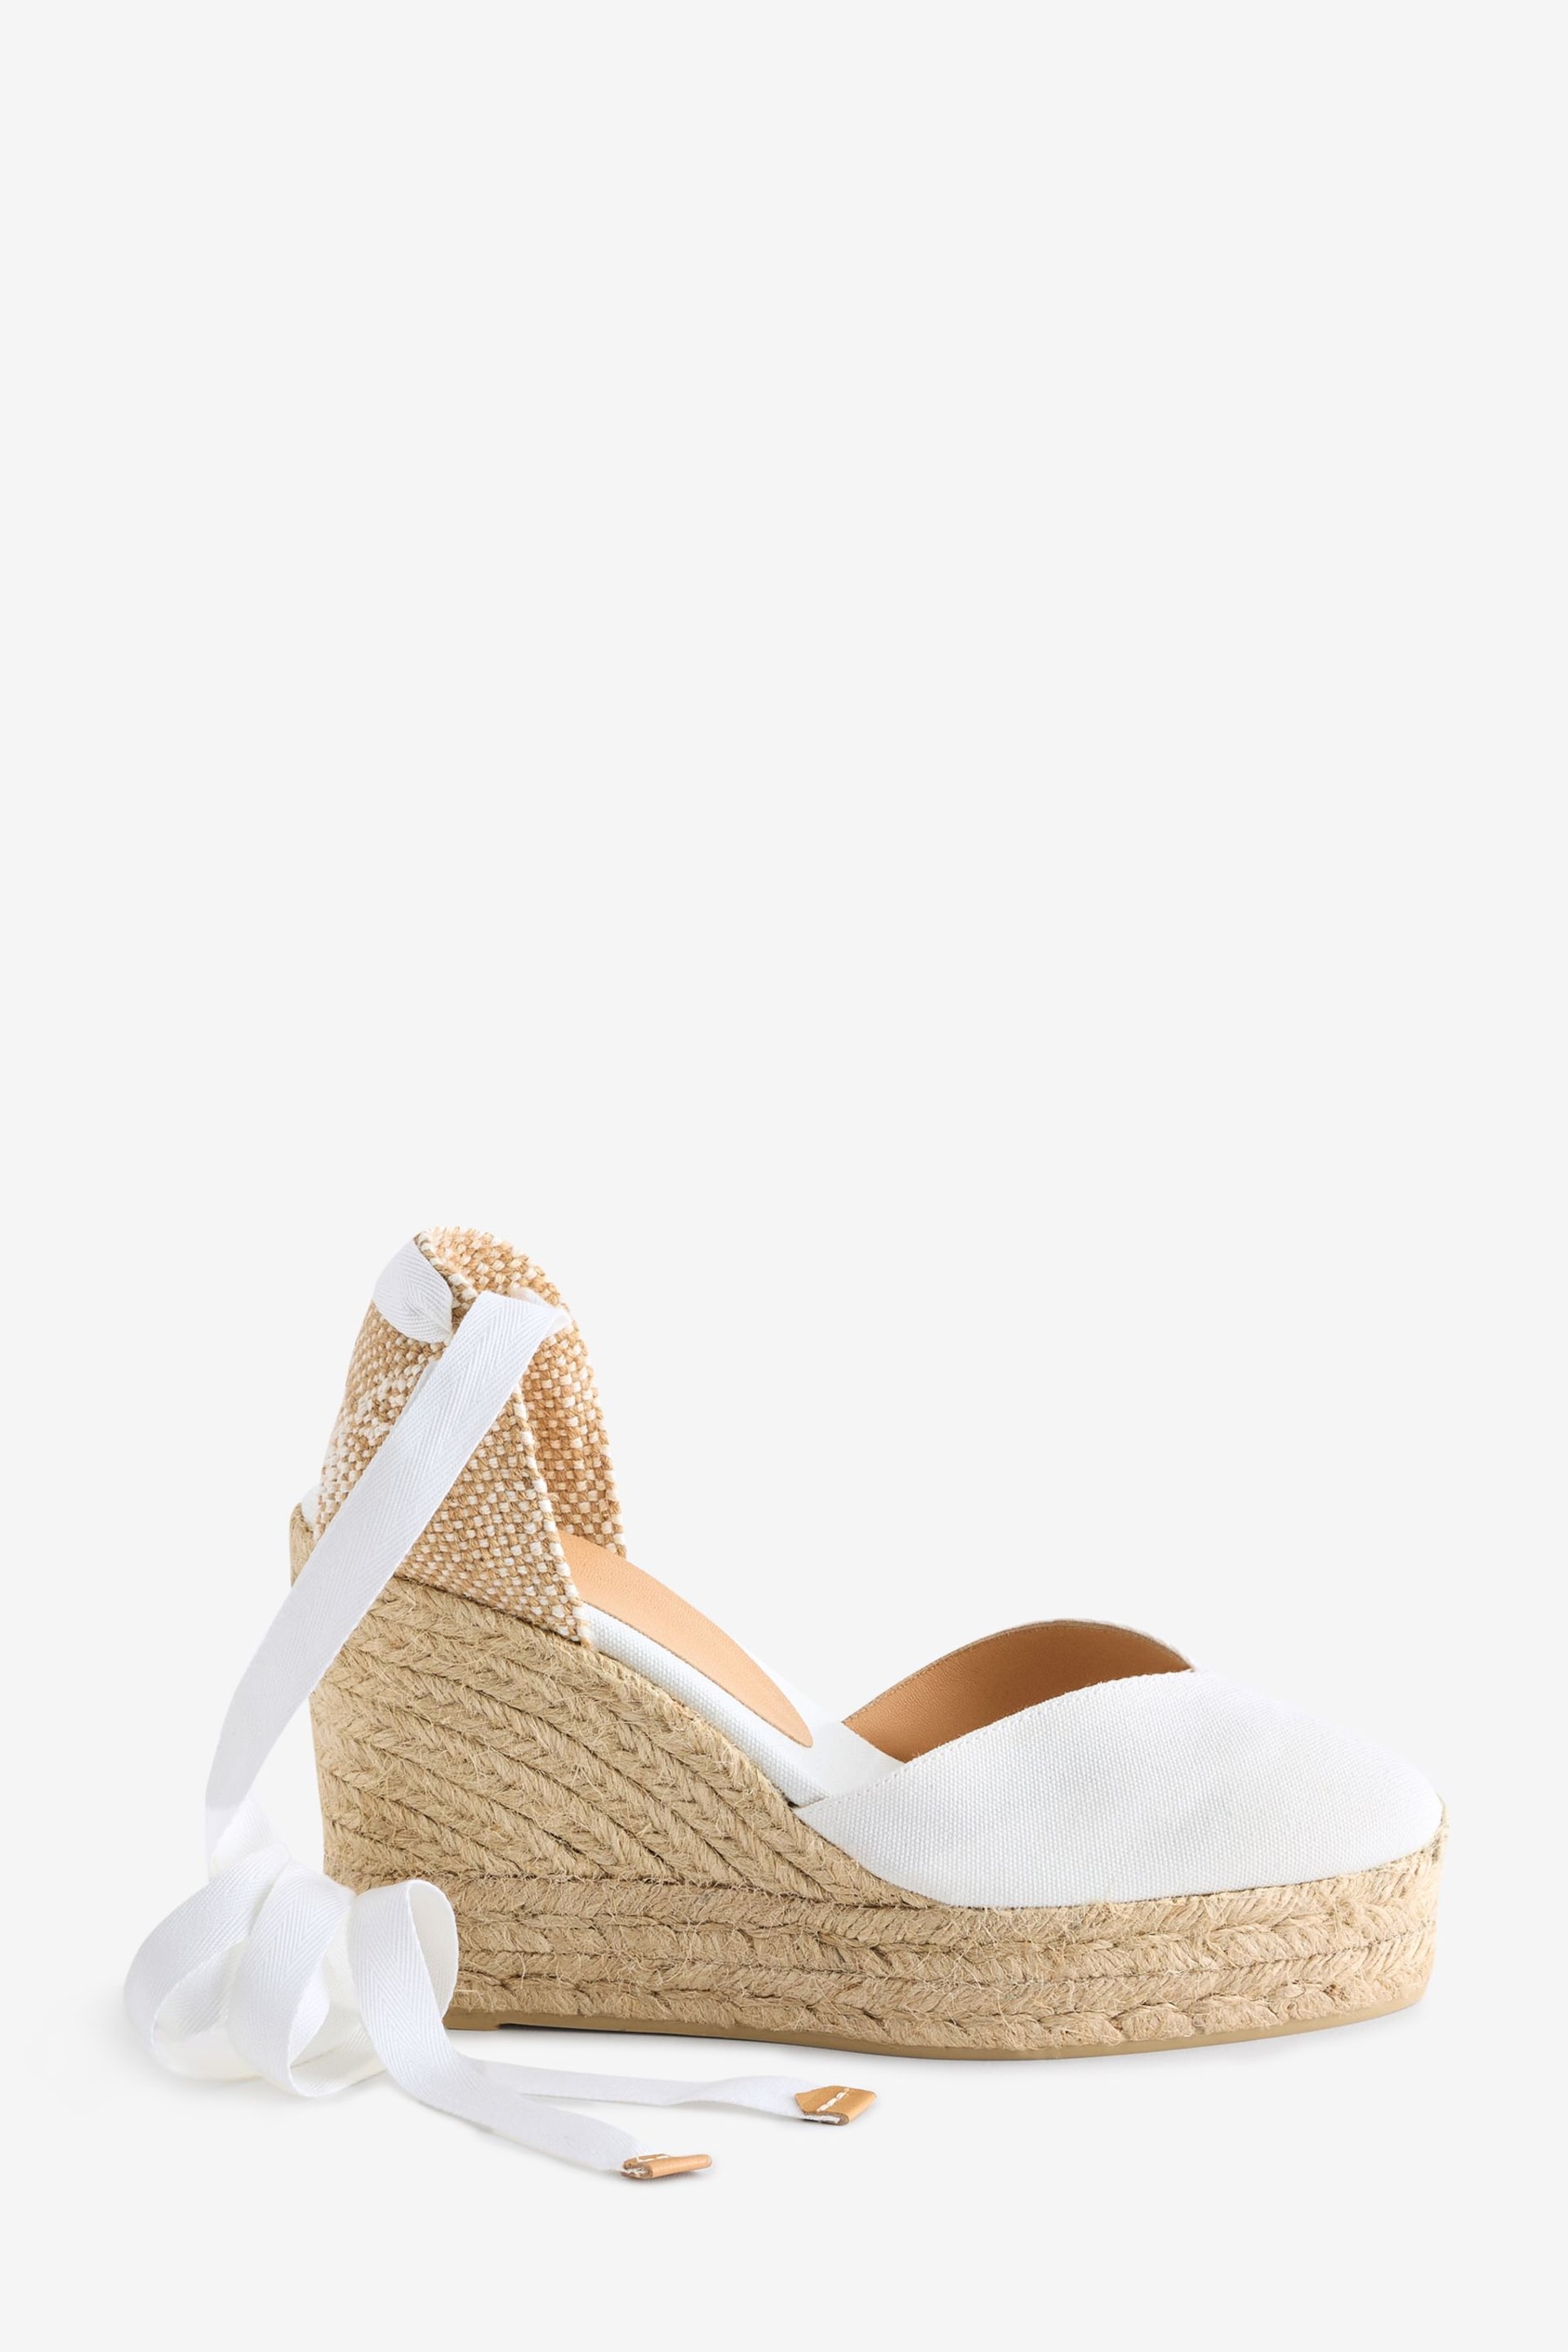 Castaner Chiara Wedge White Shoes - Image 1 of 1